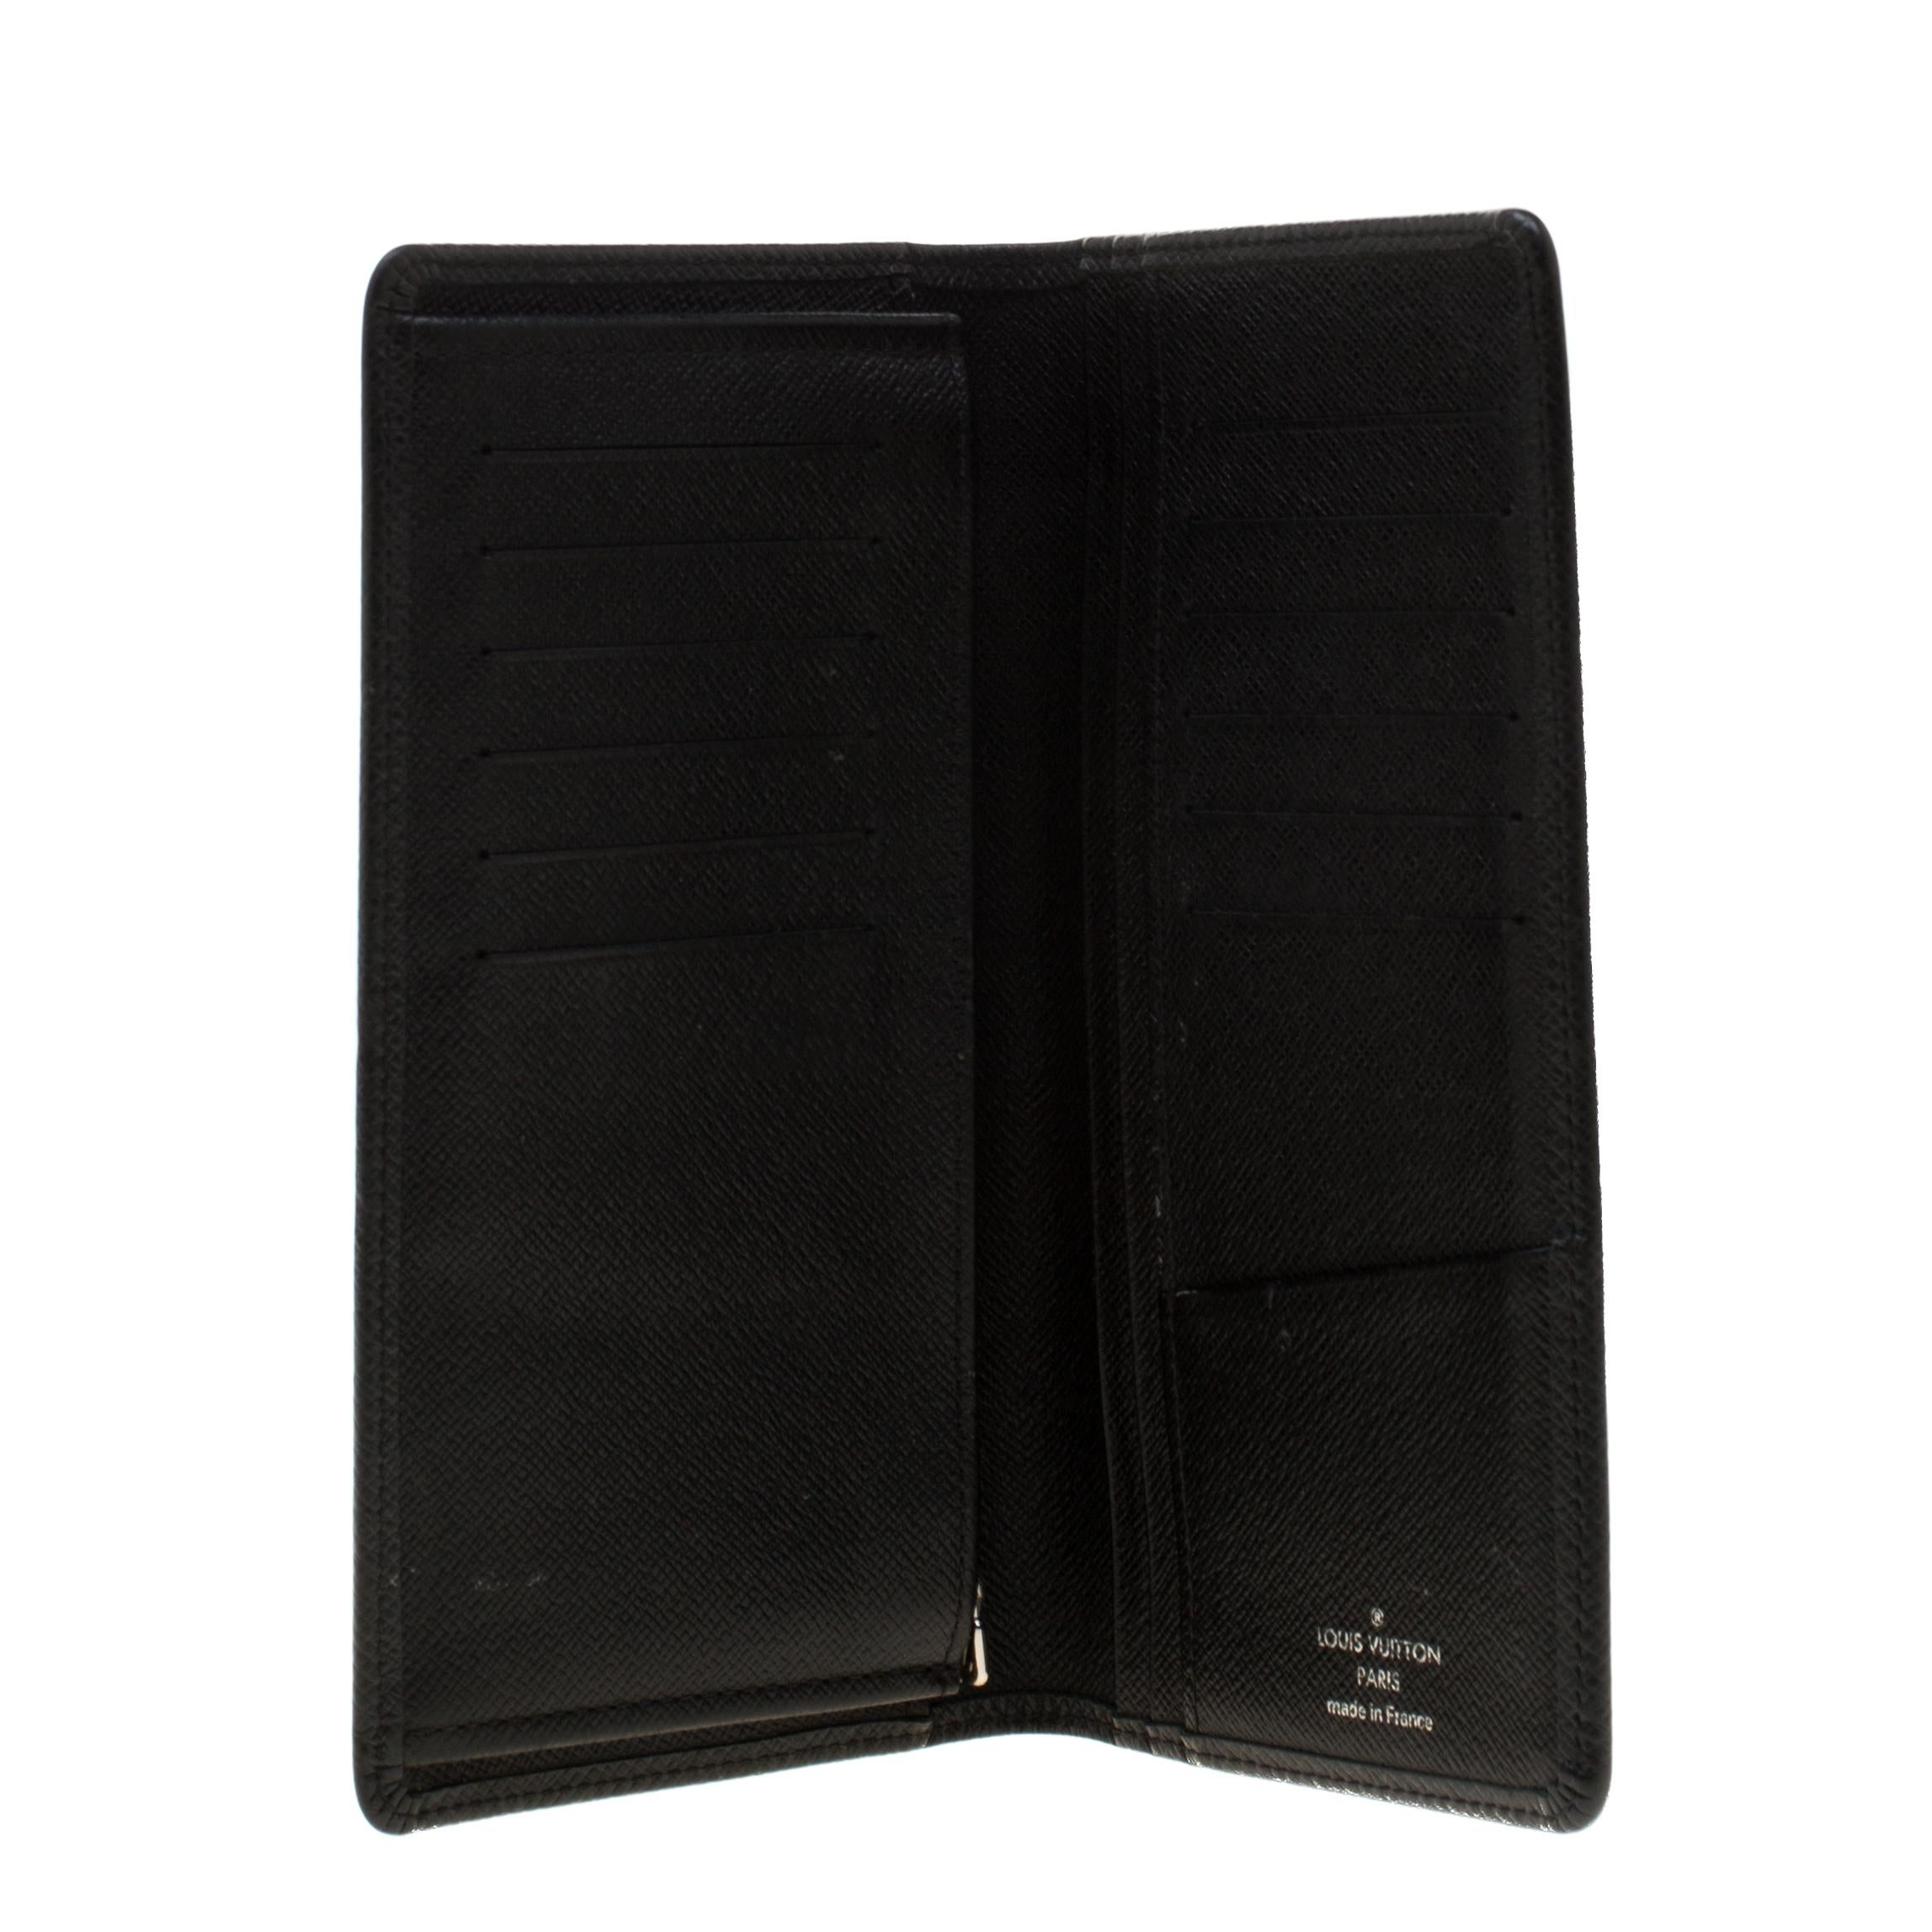 The Brazza wallet by Louis Vuitton will instantly become your favorite. It comes with multiple credit card slots, bill compartment, pockets, and a zipper compartment. Made from black Taiga leather, the wallet is designed in a sleek shape that fits